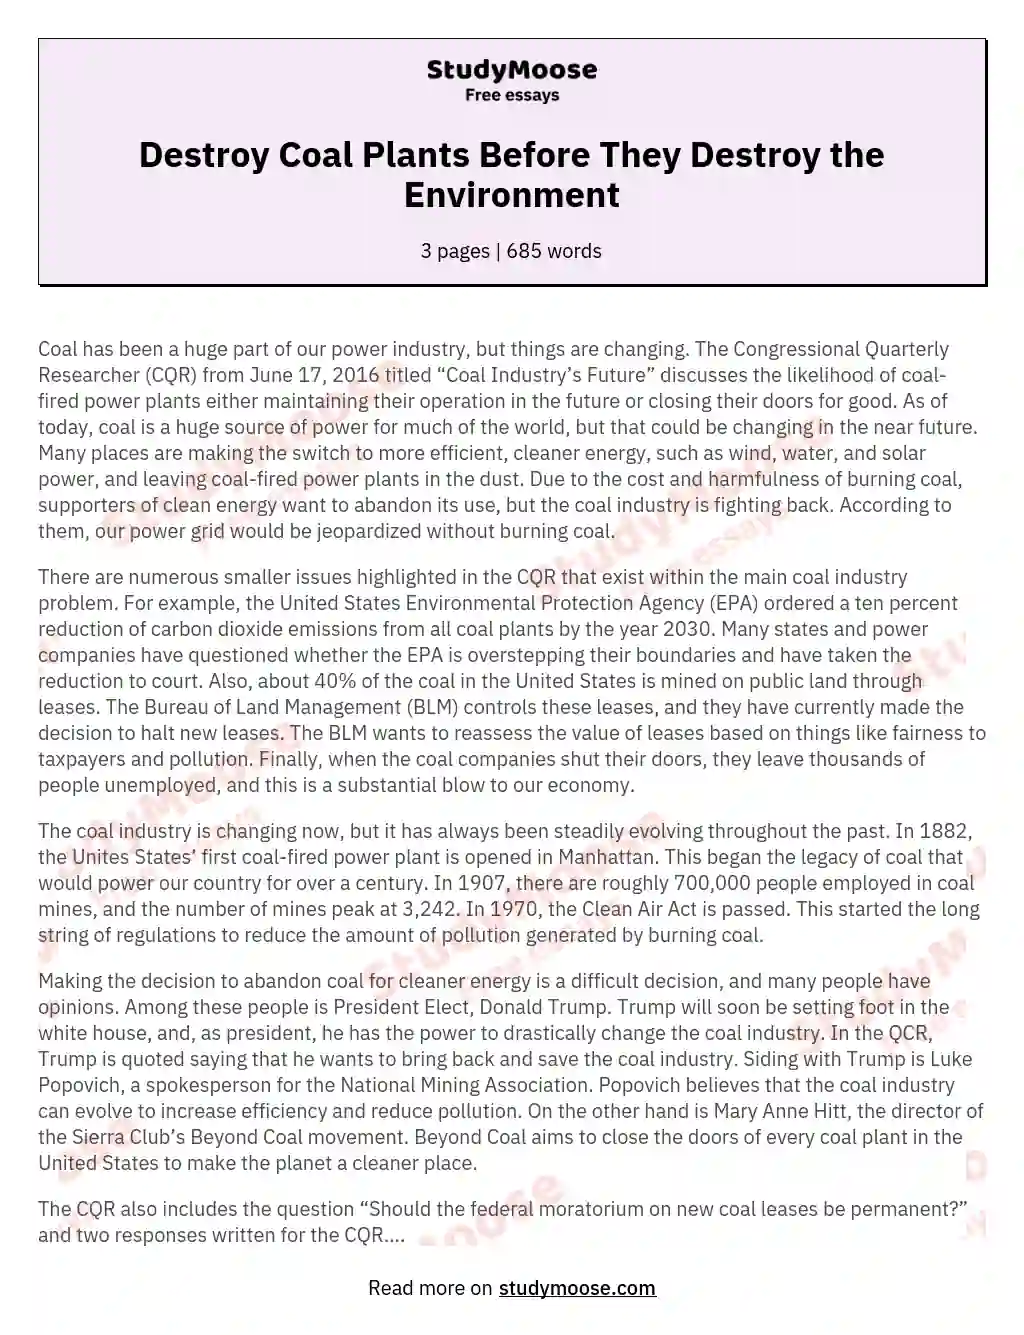 Destroy Coal Plants Before They Destroy the Environment essay